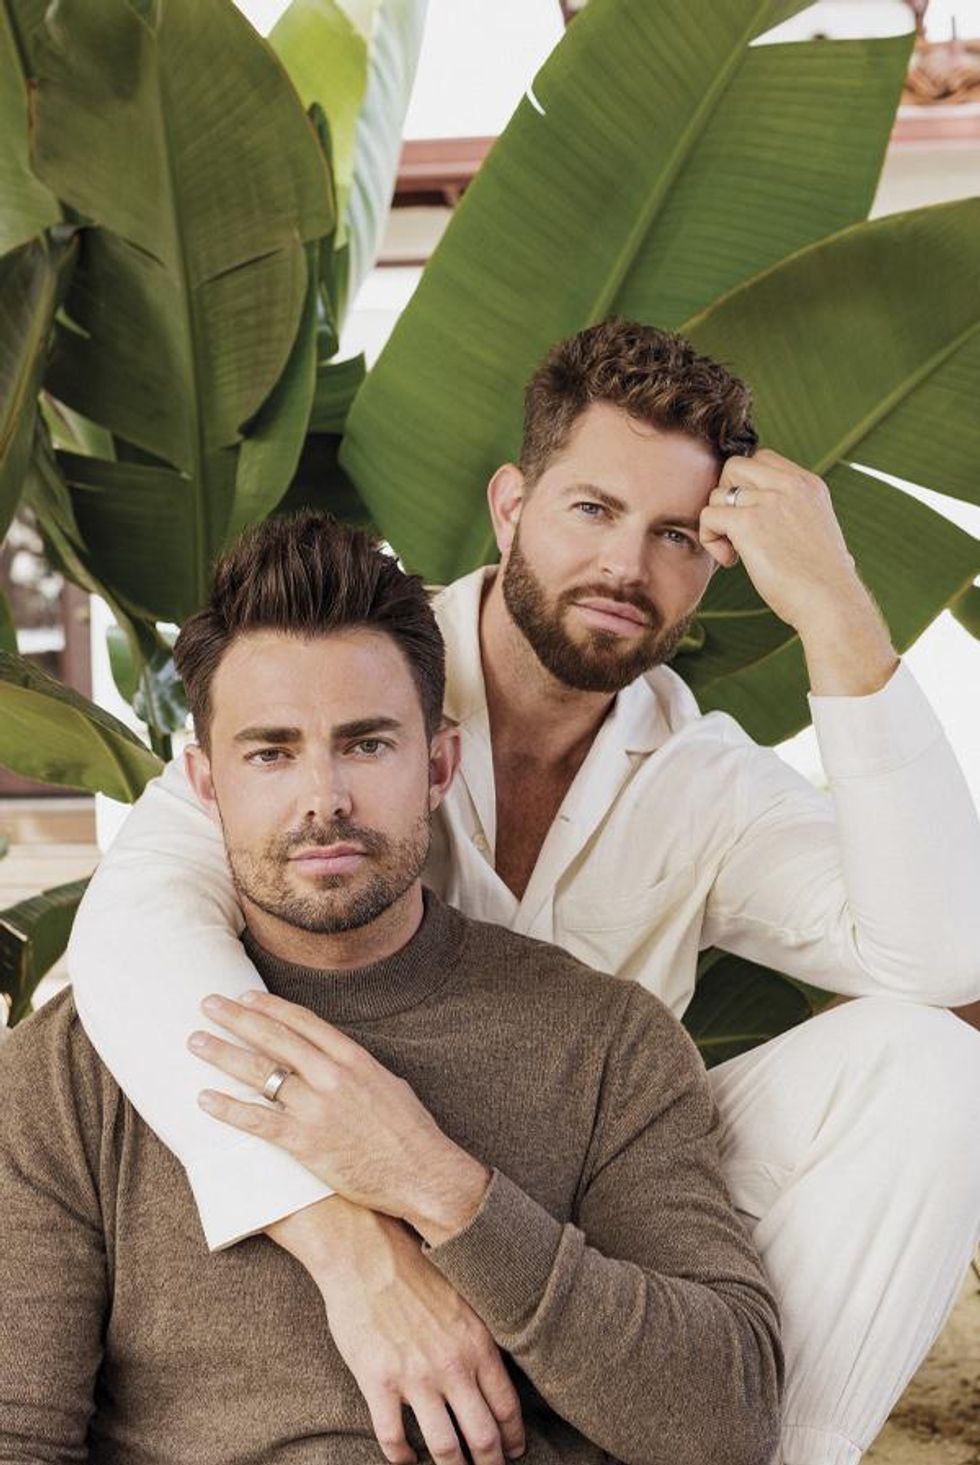 Mean Girls' Jonathan Bennett and his husband Jaymes Vaughan of MTV's The Real Friends of WeHo.